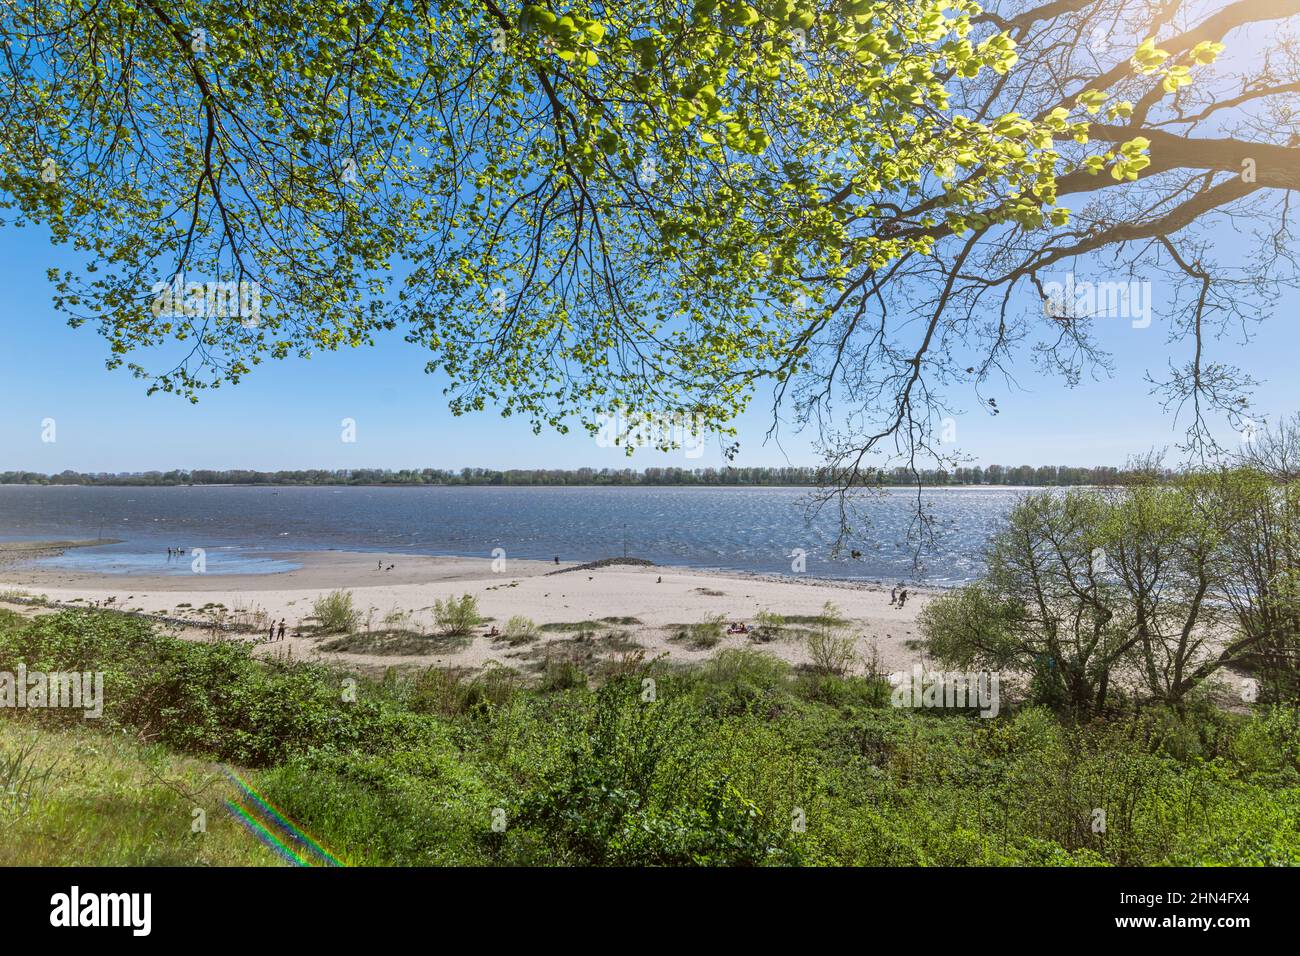 Green tree branches overhanging the beach at the Elbe River in Wedel, Germany Stock Photo